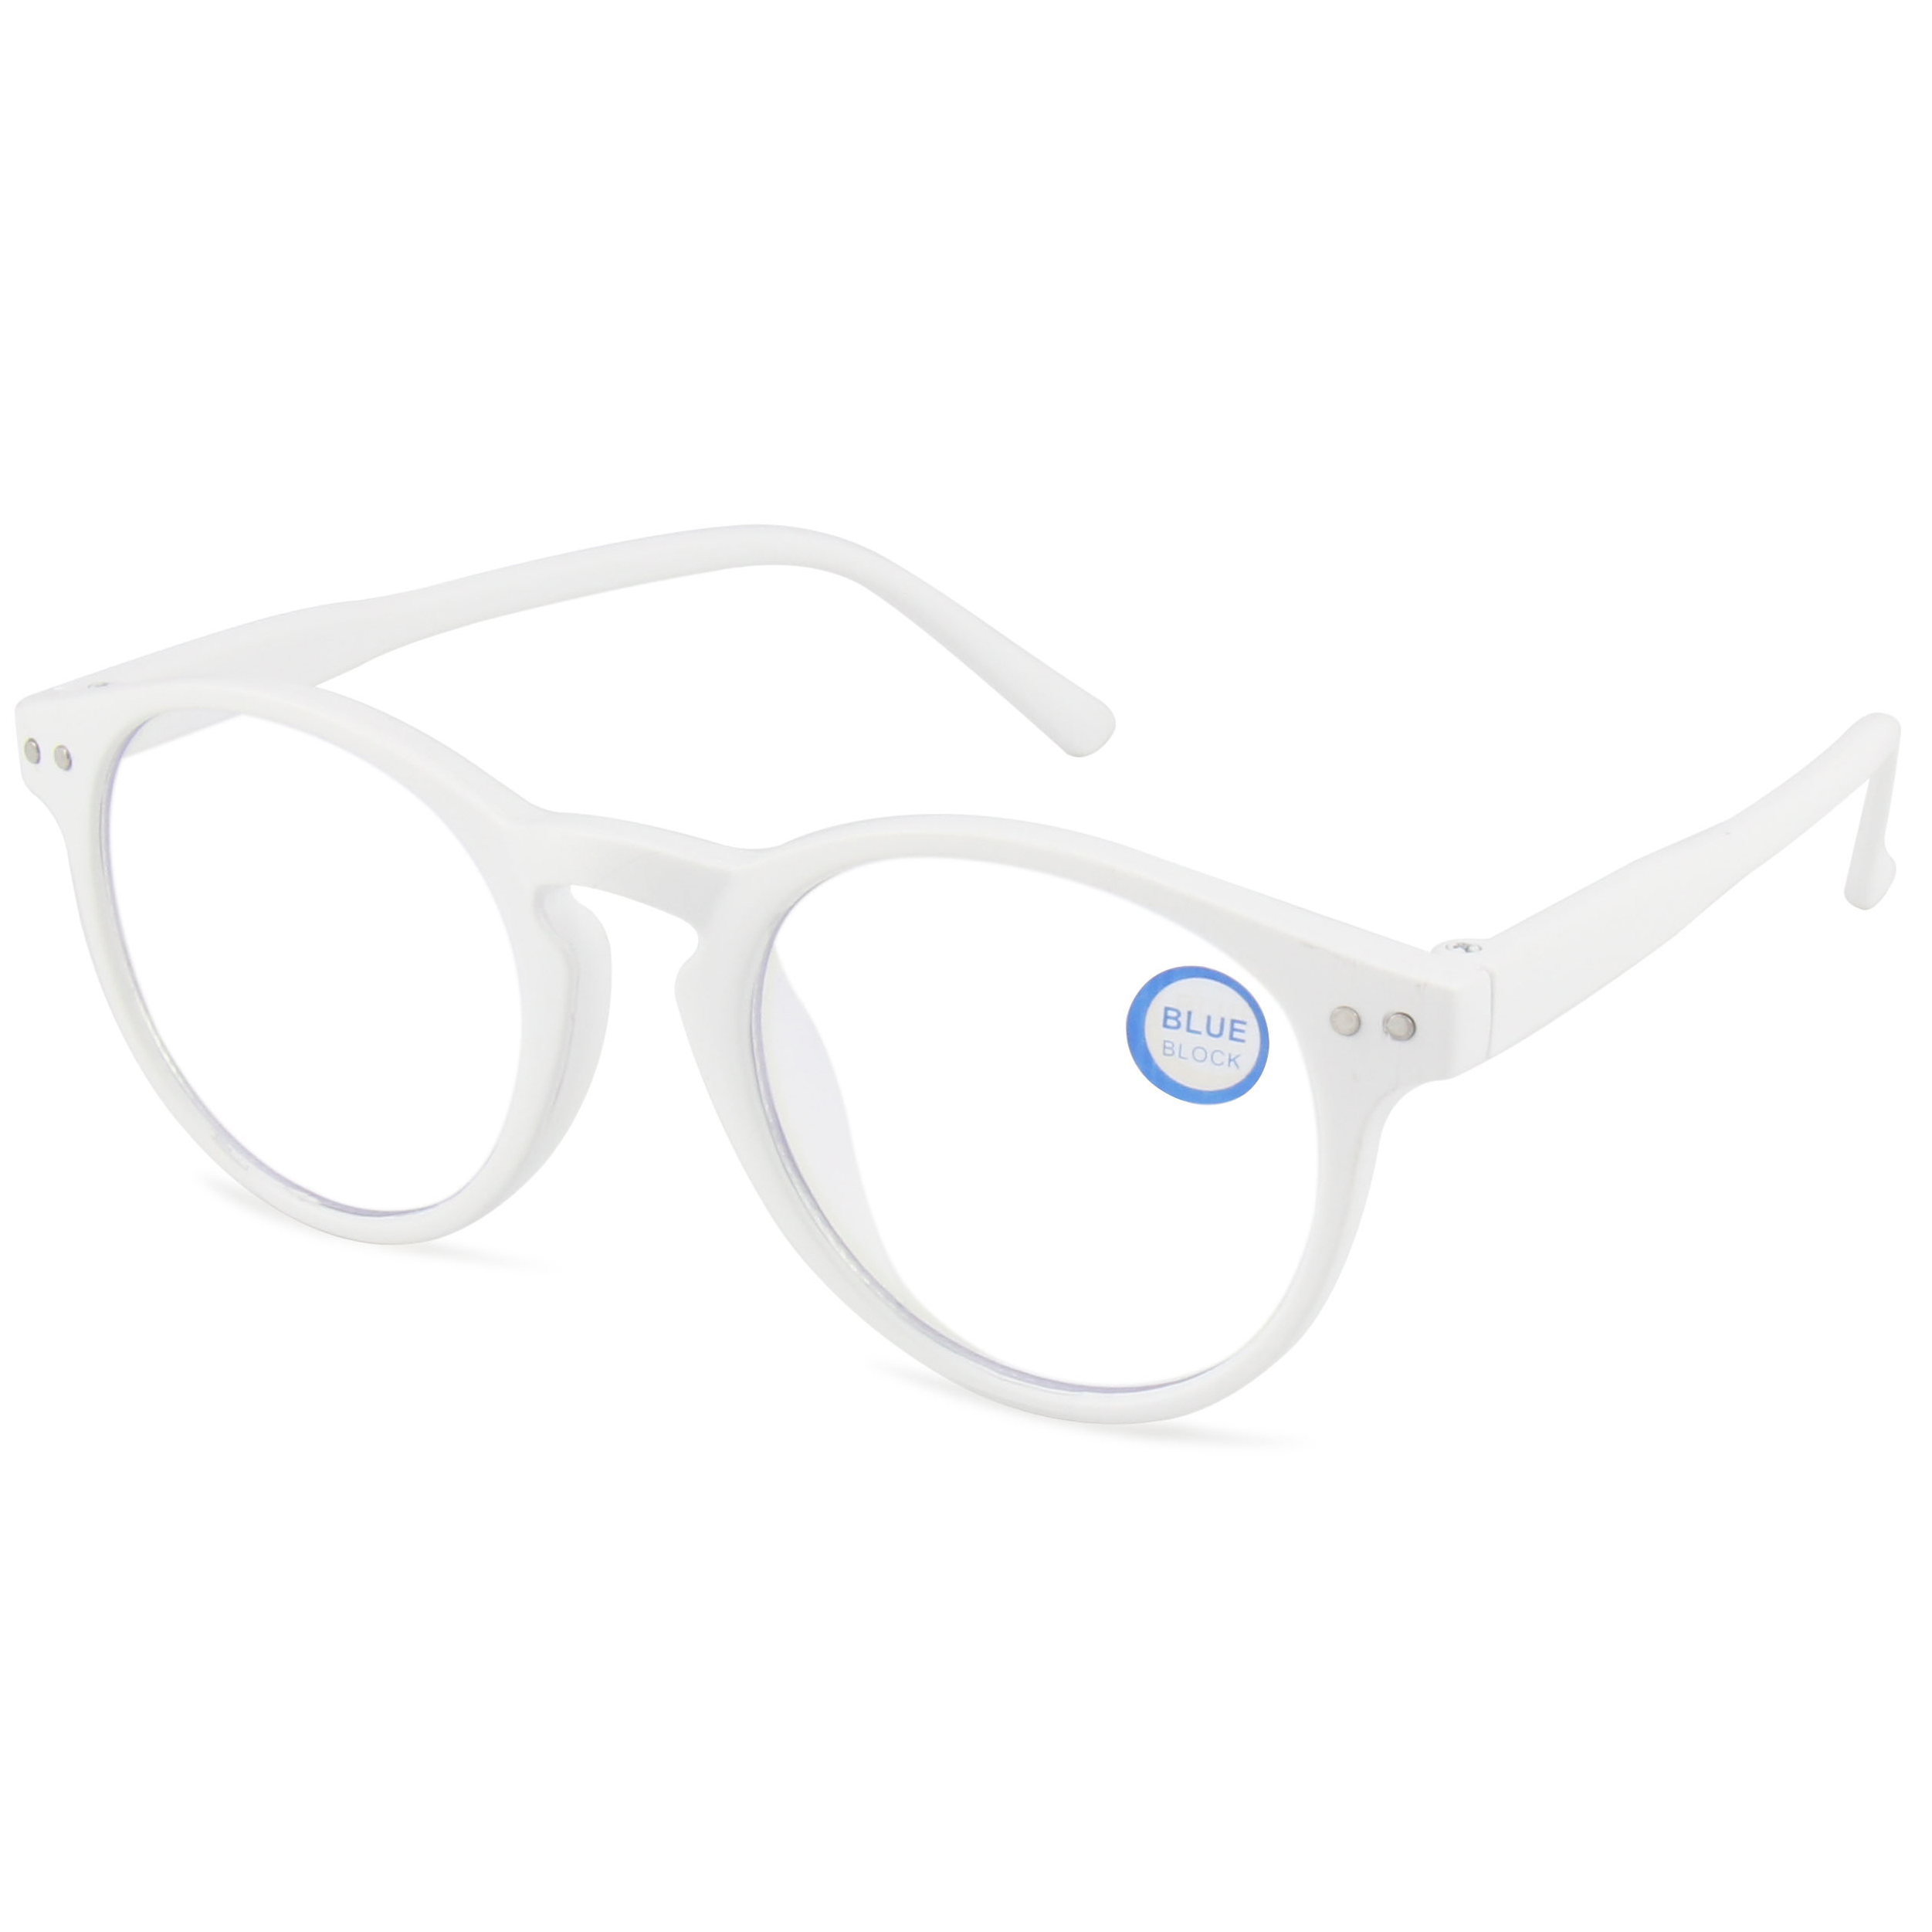 EUGENIA Excellent Quality Style Optical Eye Blue Light Blocking Frames Computer Glasses